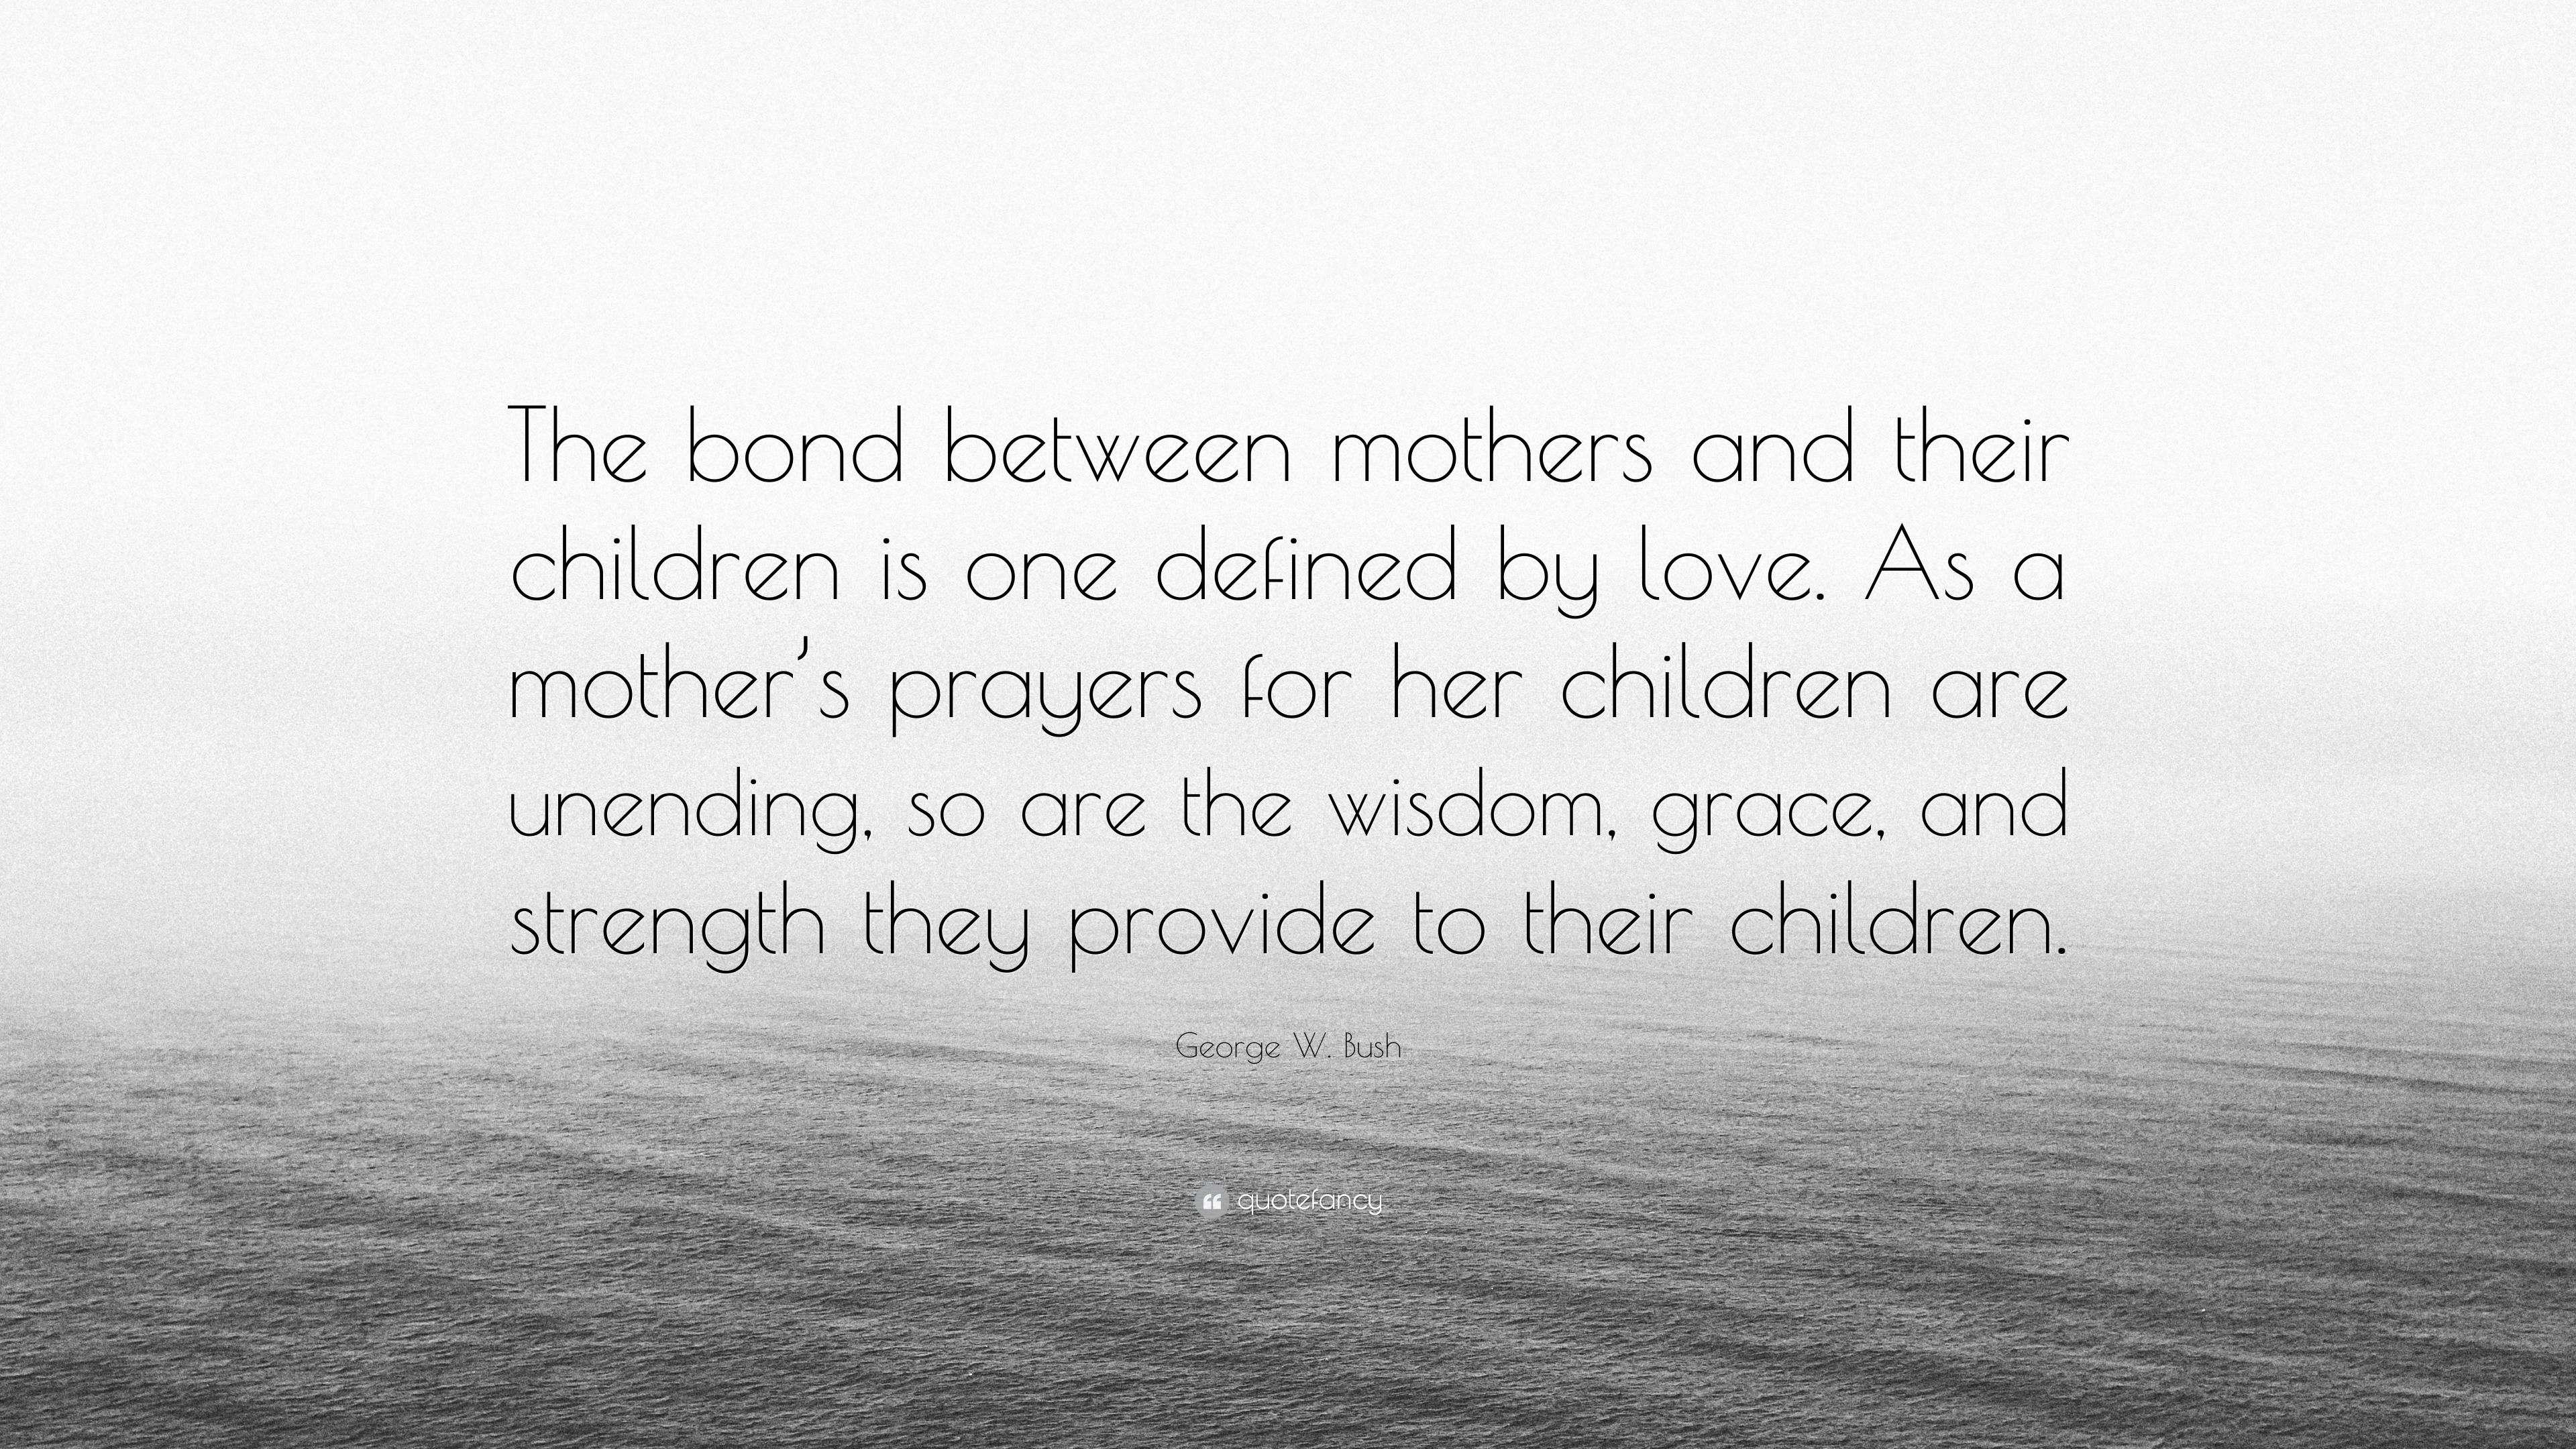 George W Bush Quote “The bond between mothers and their children is one